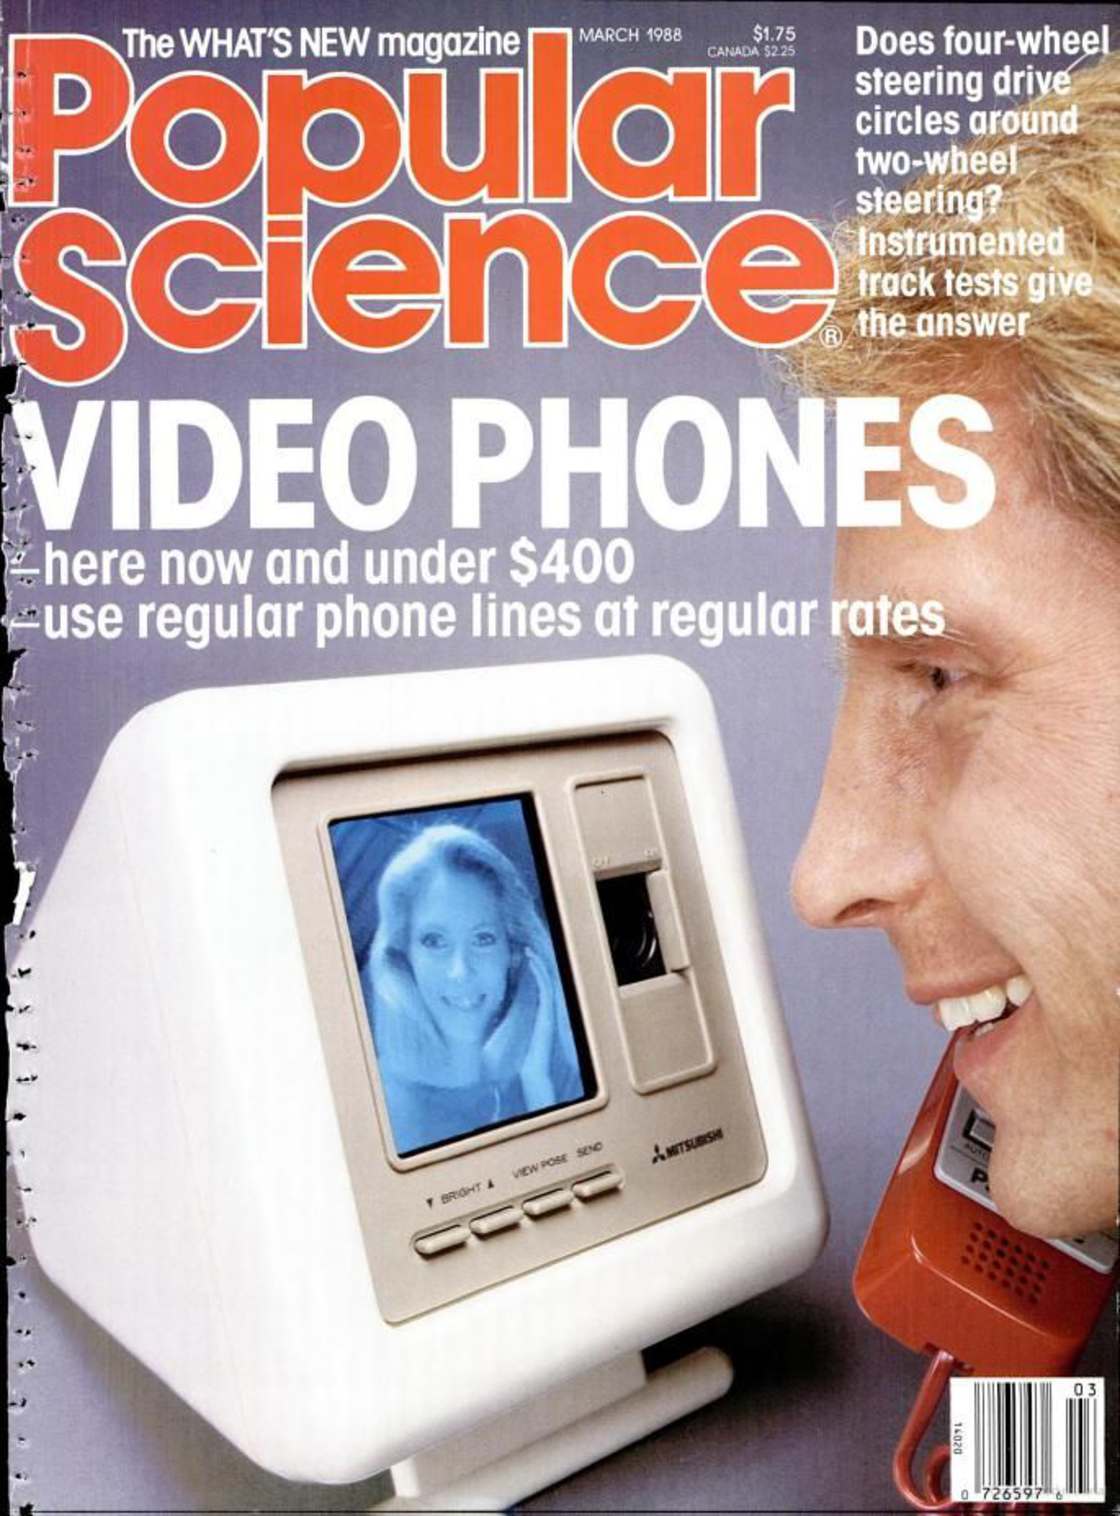 video phones in the 80's - The What'S New magazine $1.75 Canada $225 Popular Esciences Video Phones Does fourwheel steering drive circles around twowheel steering? Instrumented track tests give @ the answer here now and under $400 use regular phone lines 